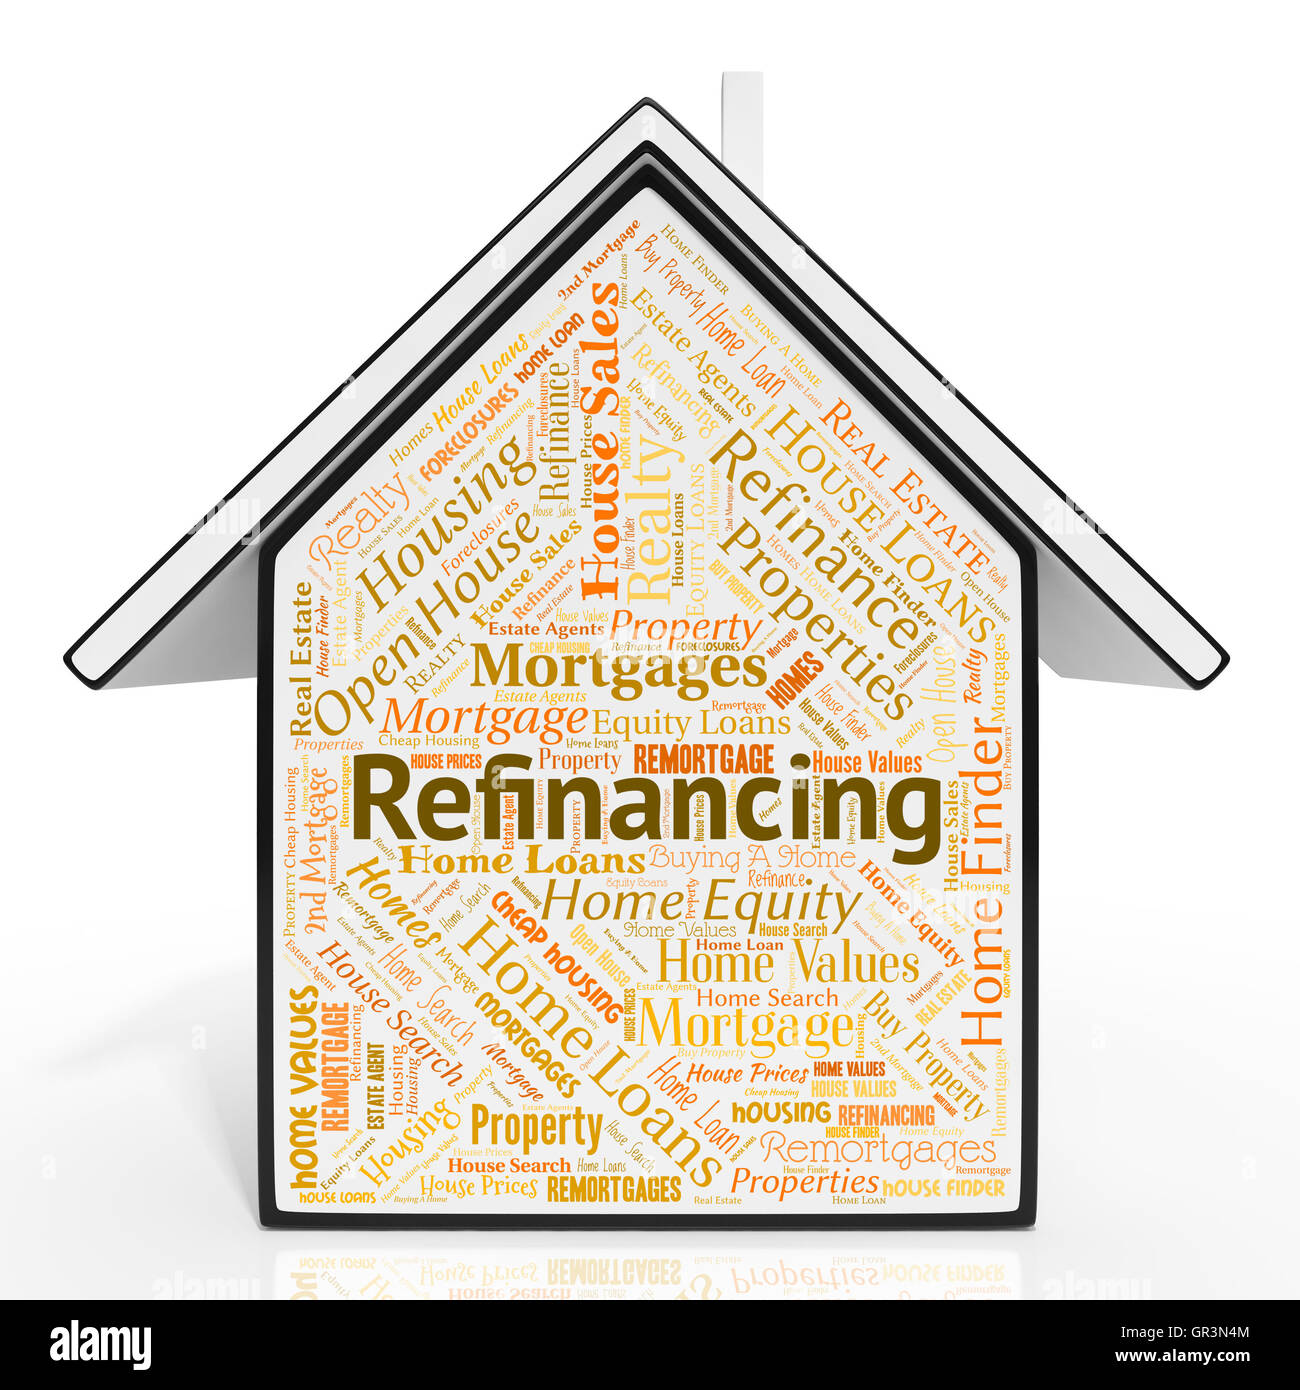 Refinancing House Representing Mortgage Property And Properties Stock Photo